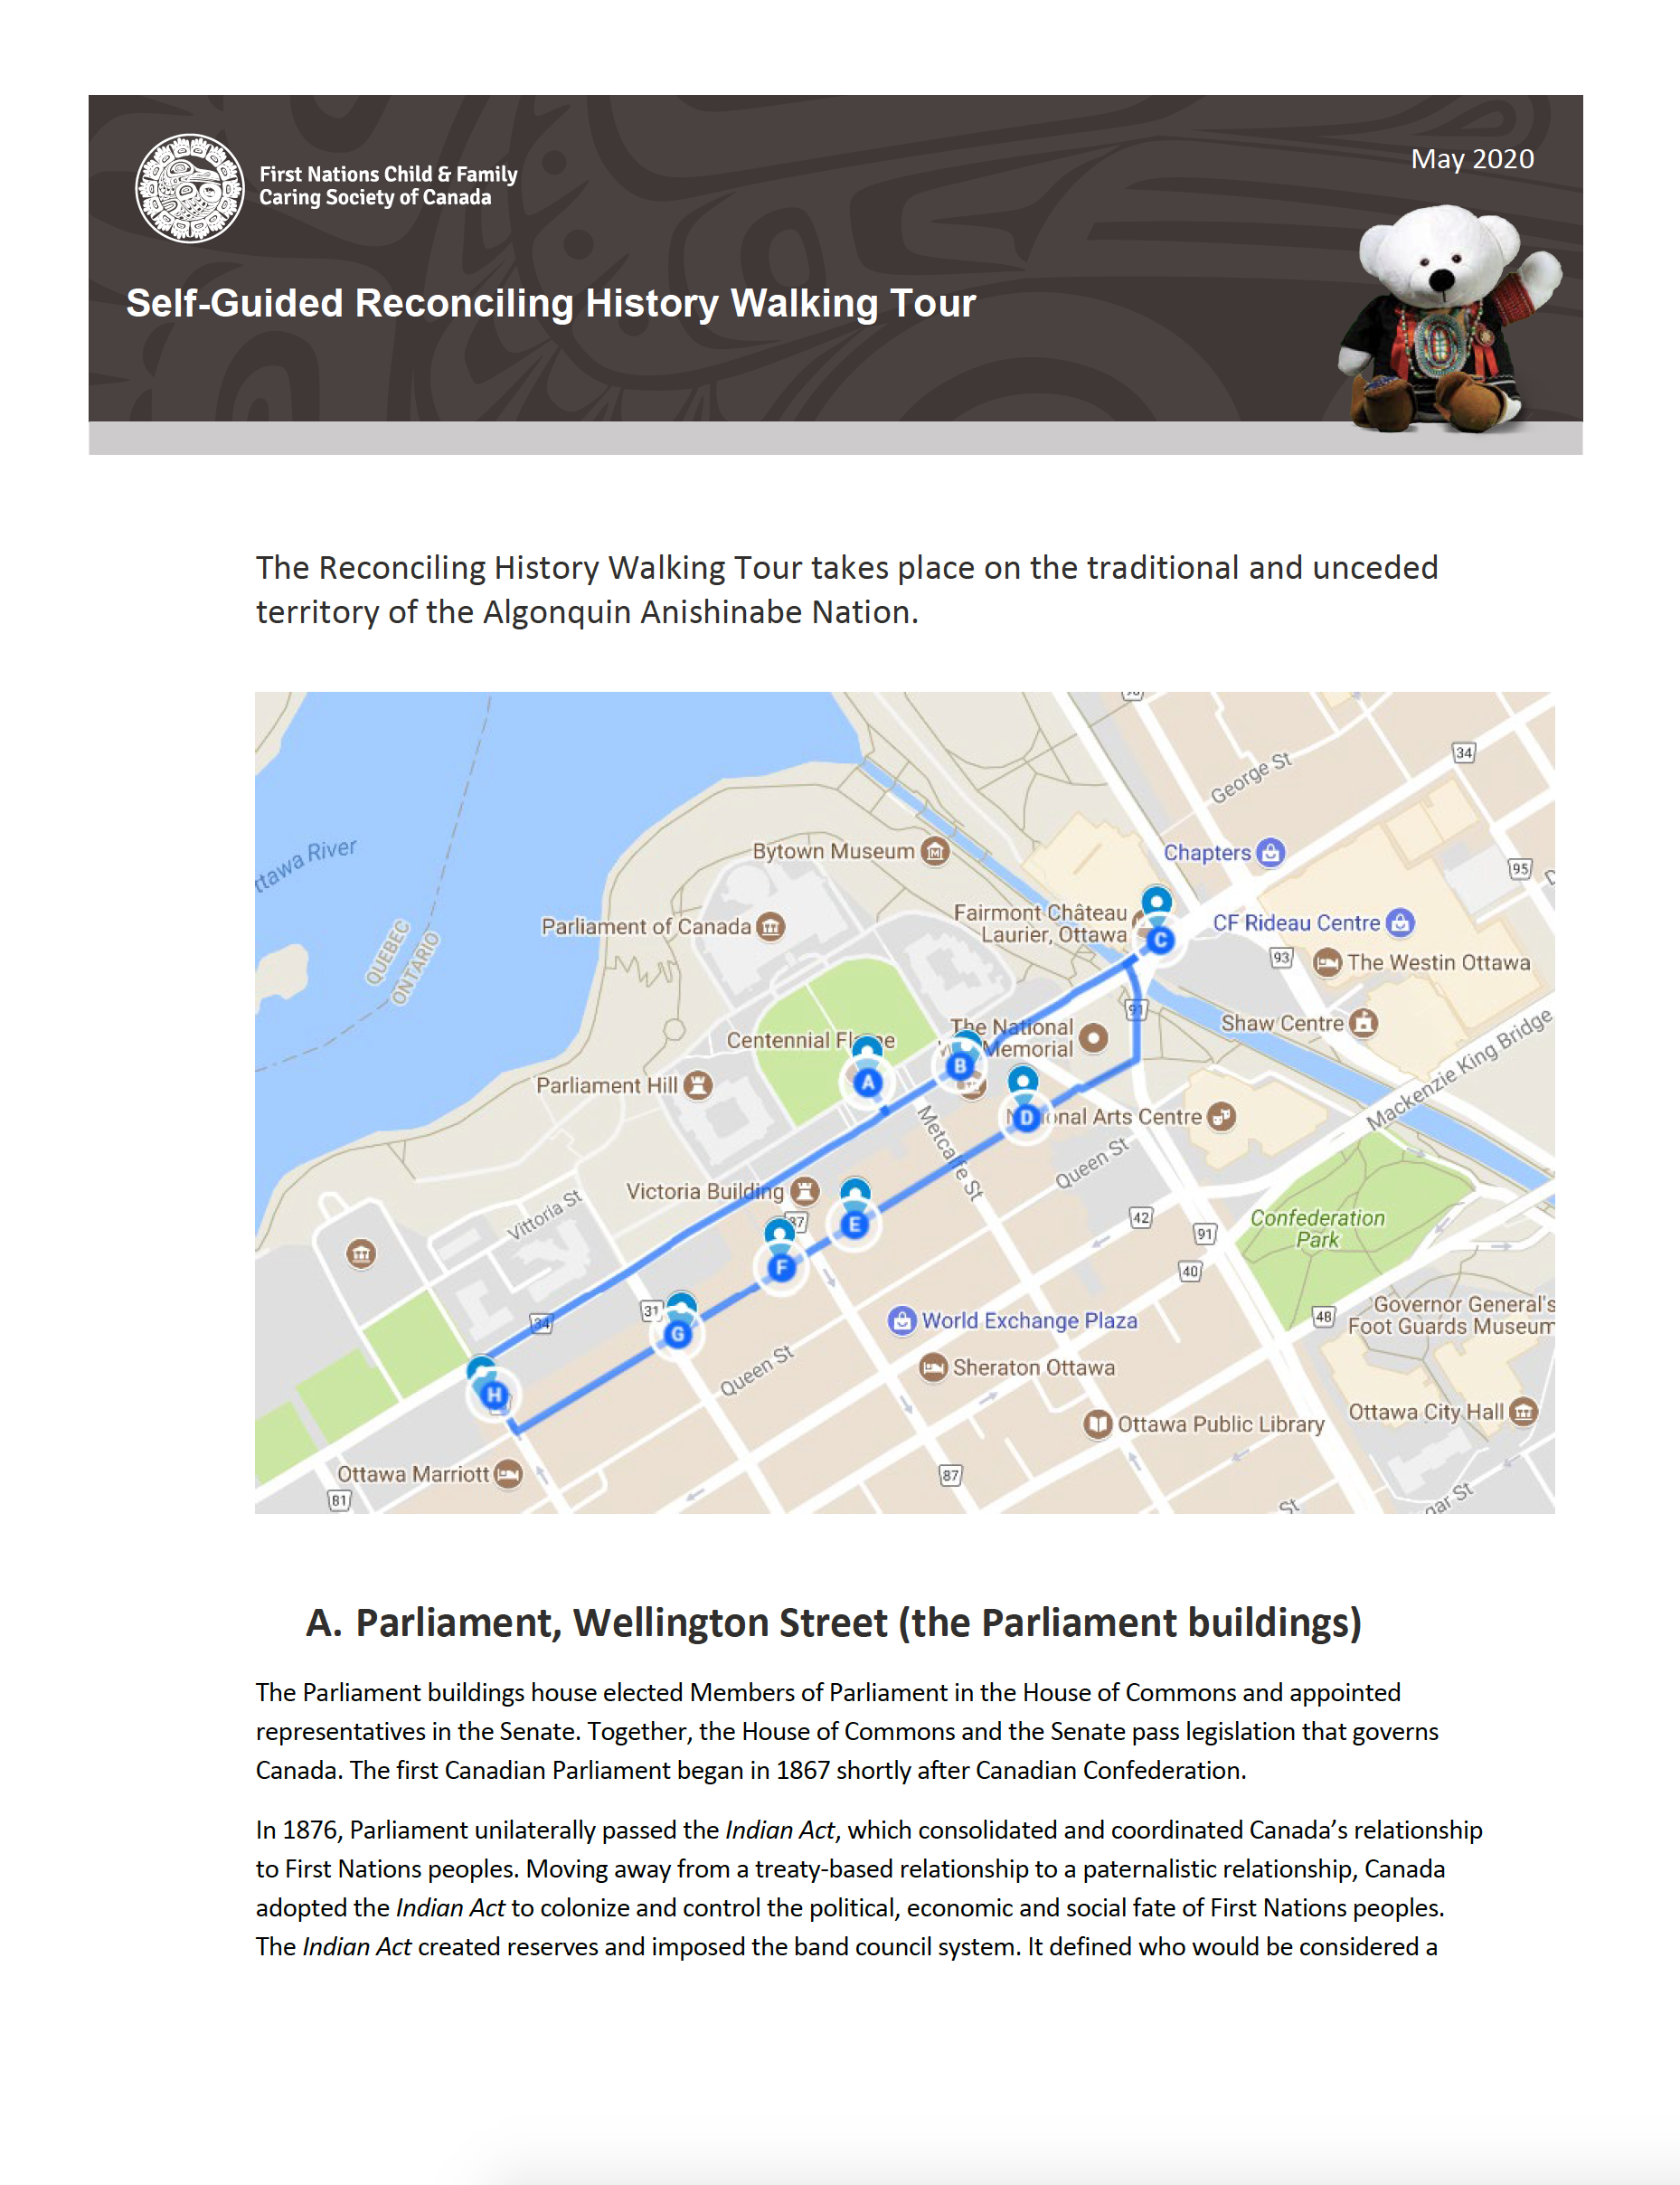 Reconciling History Walking Tour